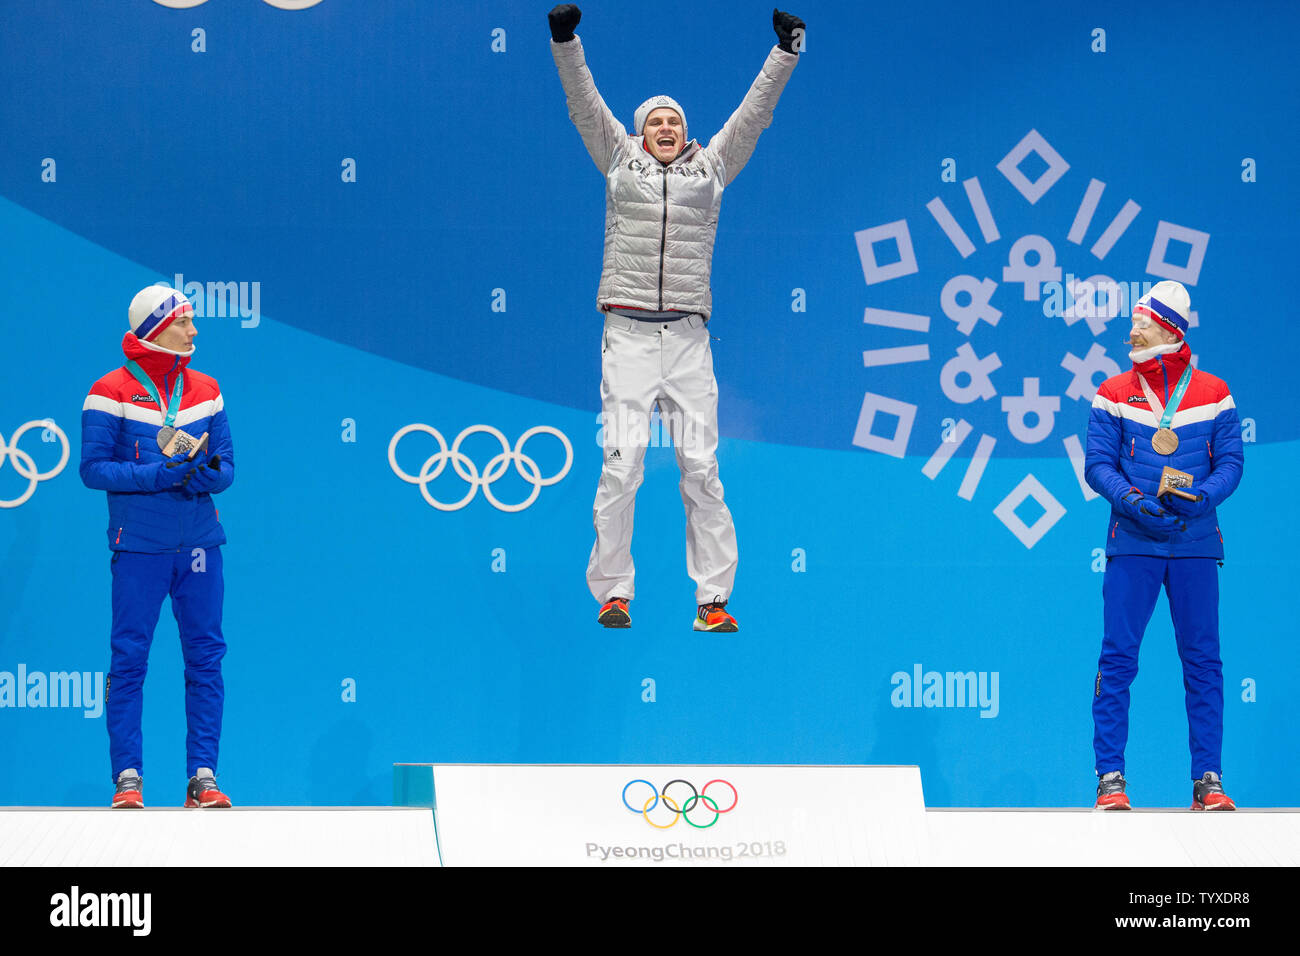 Men's normal hill ski jumping gold medalist Andreas Welling of Germany jumps on the podium during a medal ceremony for the Pyeongchang 2018 Winter Olympics, at the Olympic Medal Plaza in Daegwalnyeong, South Korea, on February 11, 2018. Looking on are silver medalist Andre Forfang (L) and bronze medalist Robert Johansson both of Norway. Photo by Matthew Healey/UPI Stock Photo